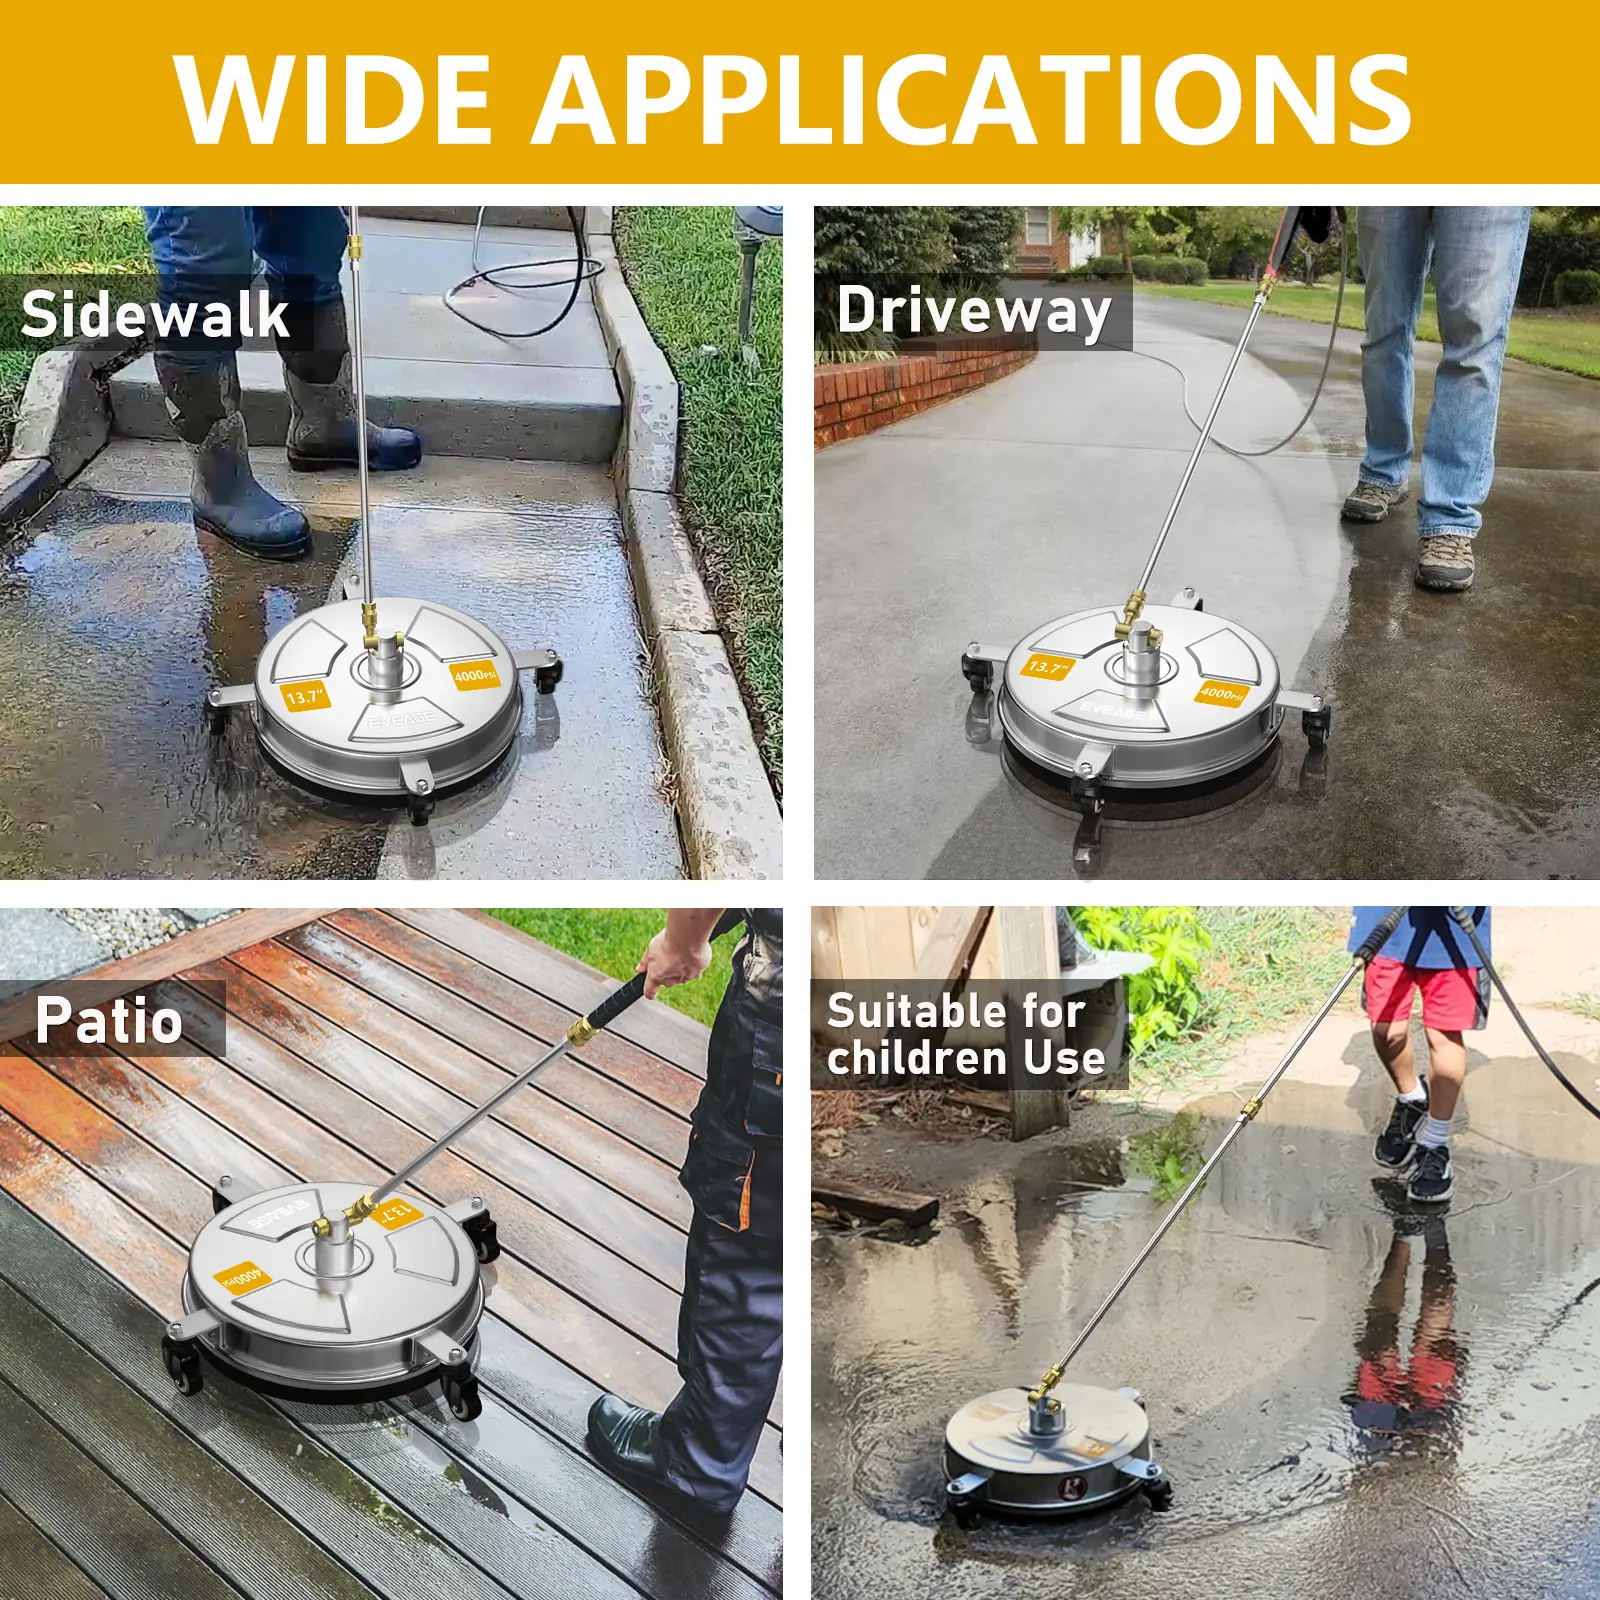 diveway surface cleaner